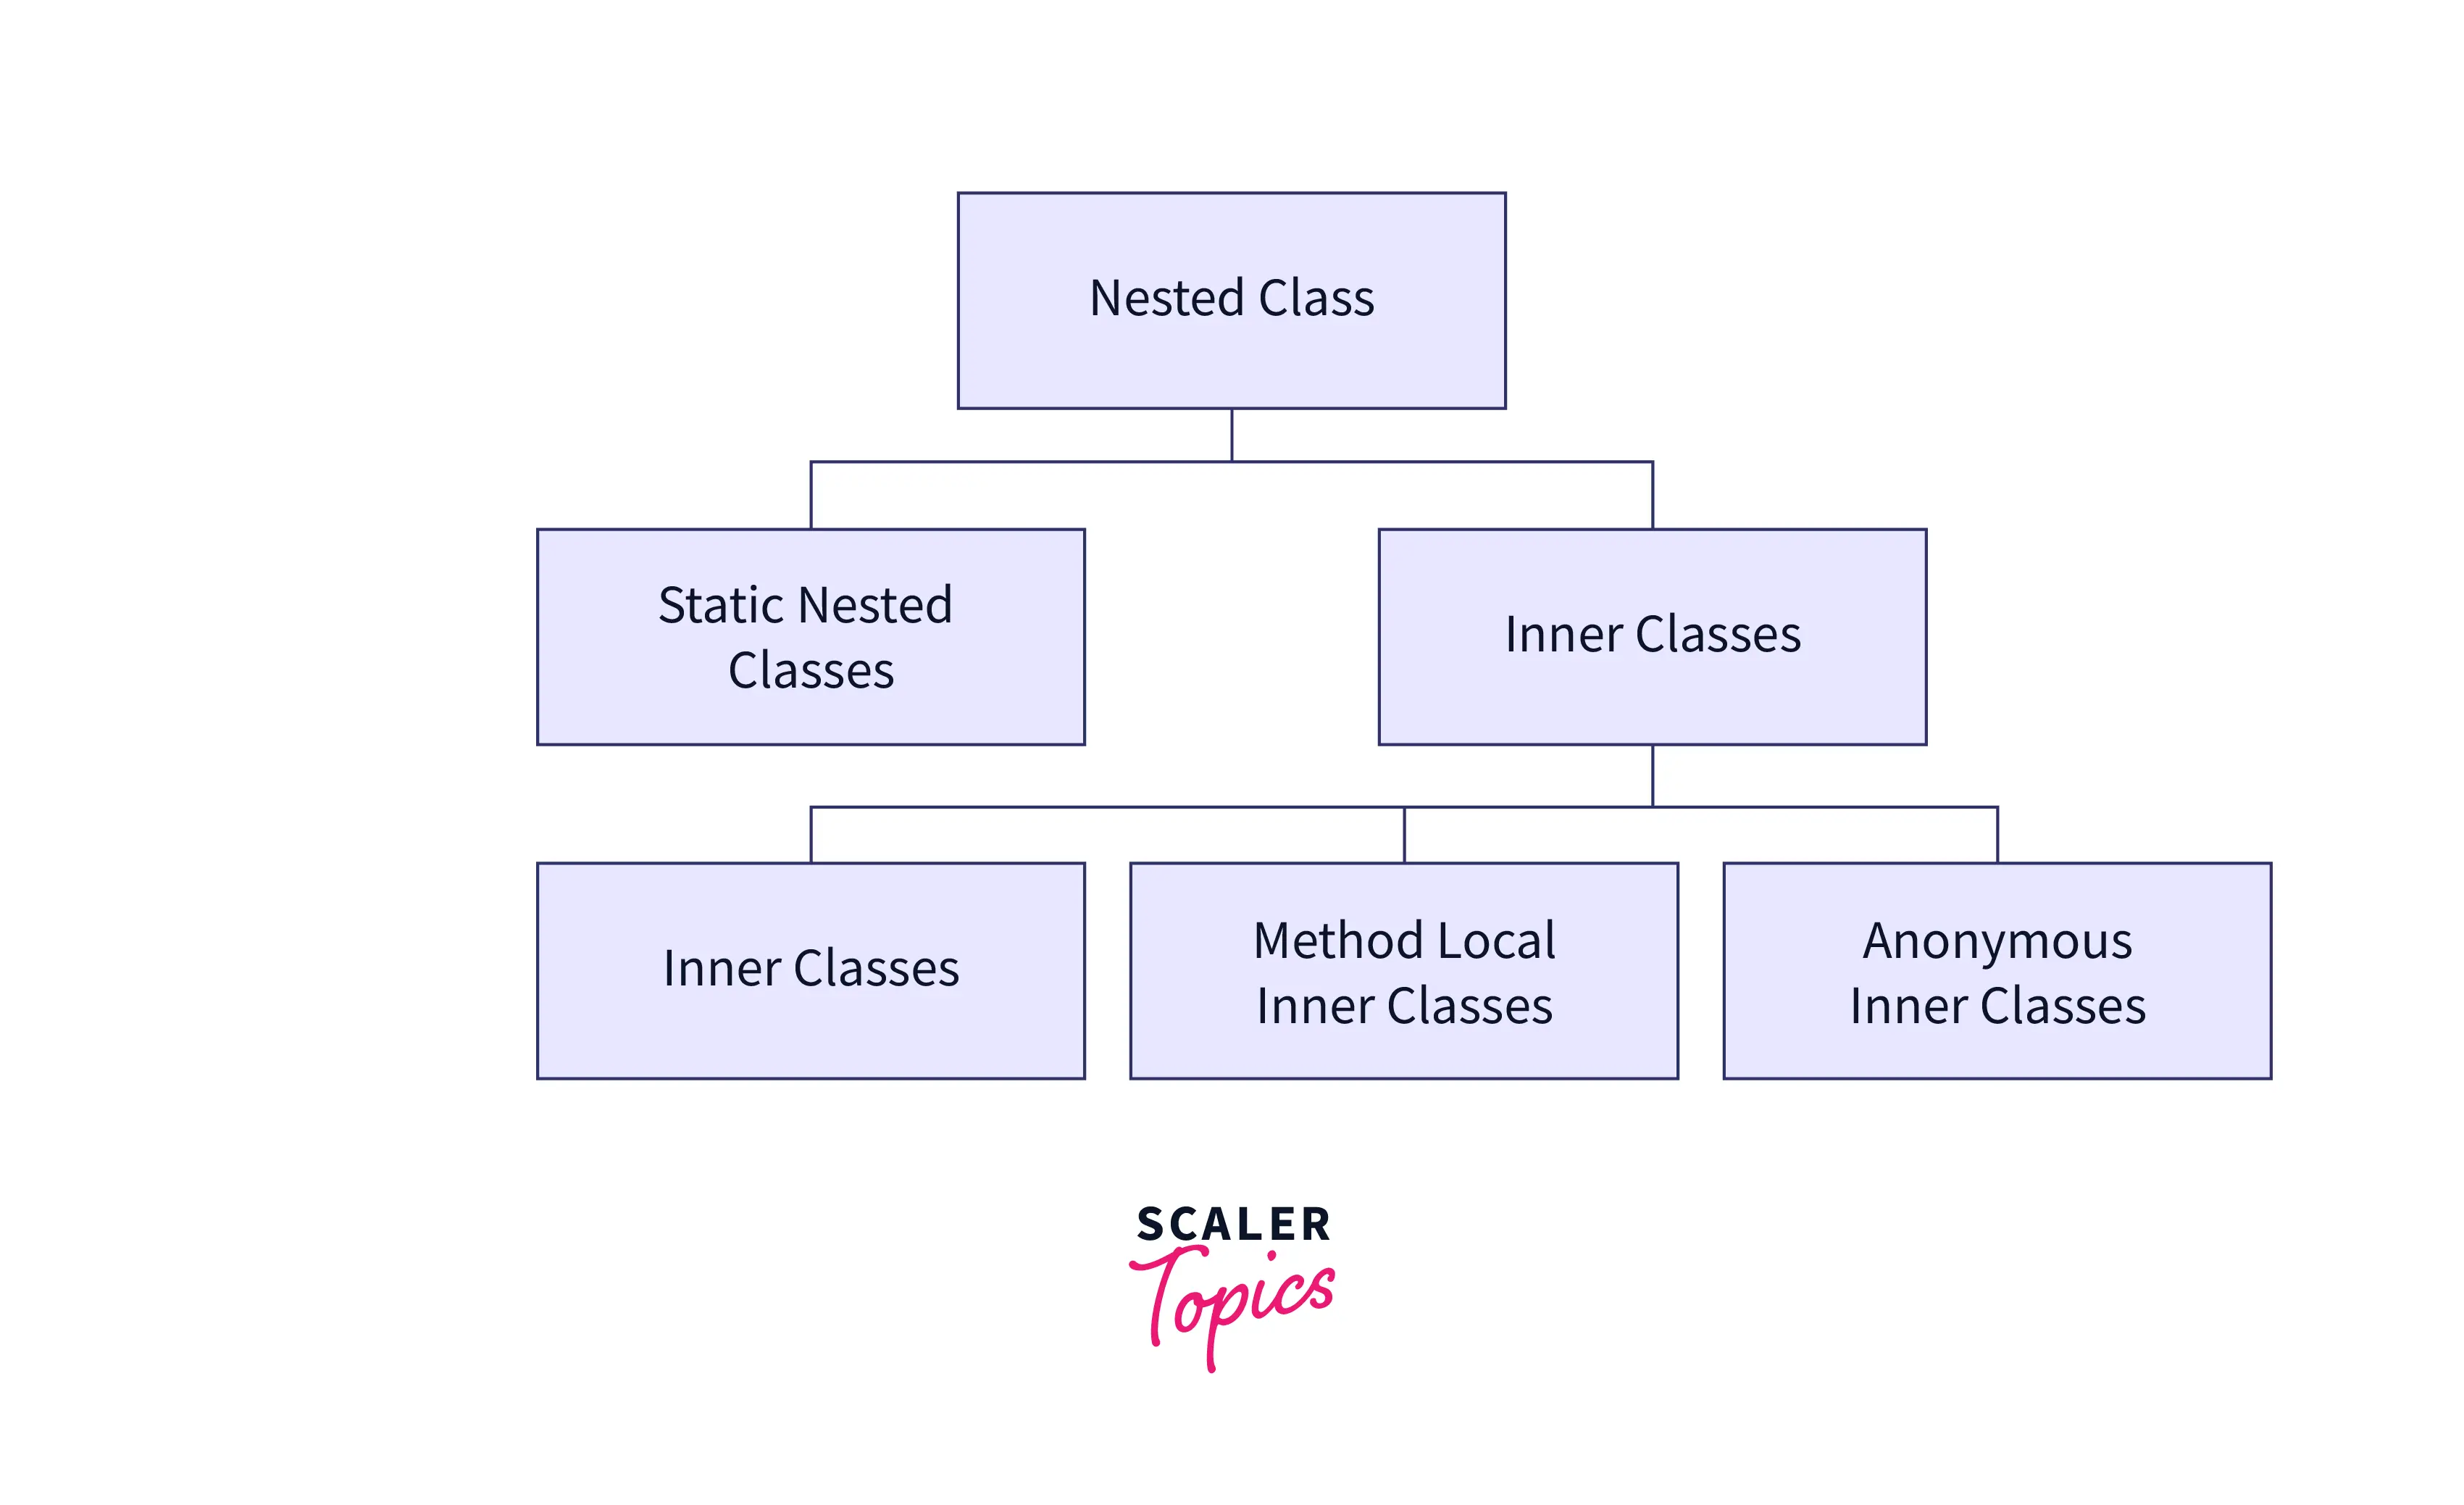 hierarchy-of-anonymous-inner-class-in-nested-classes